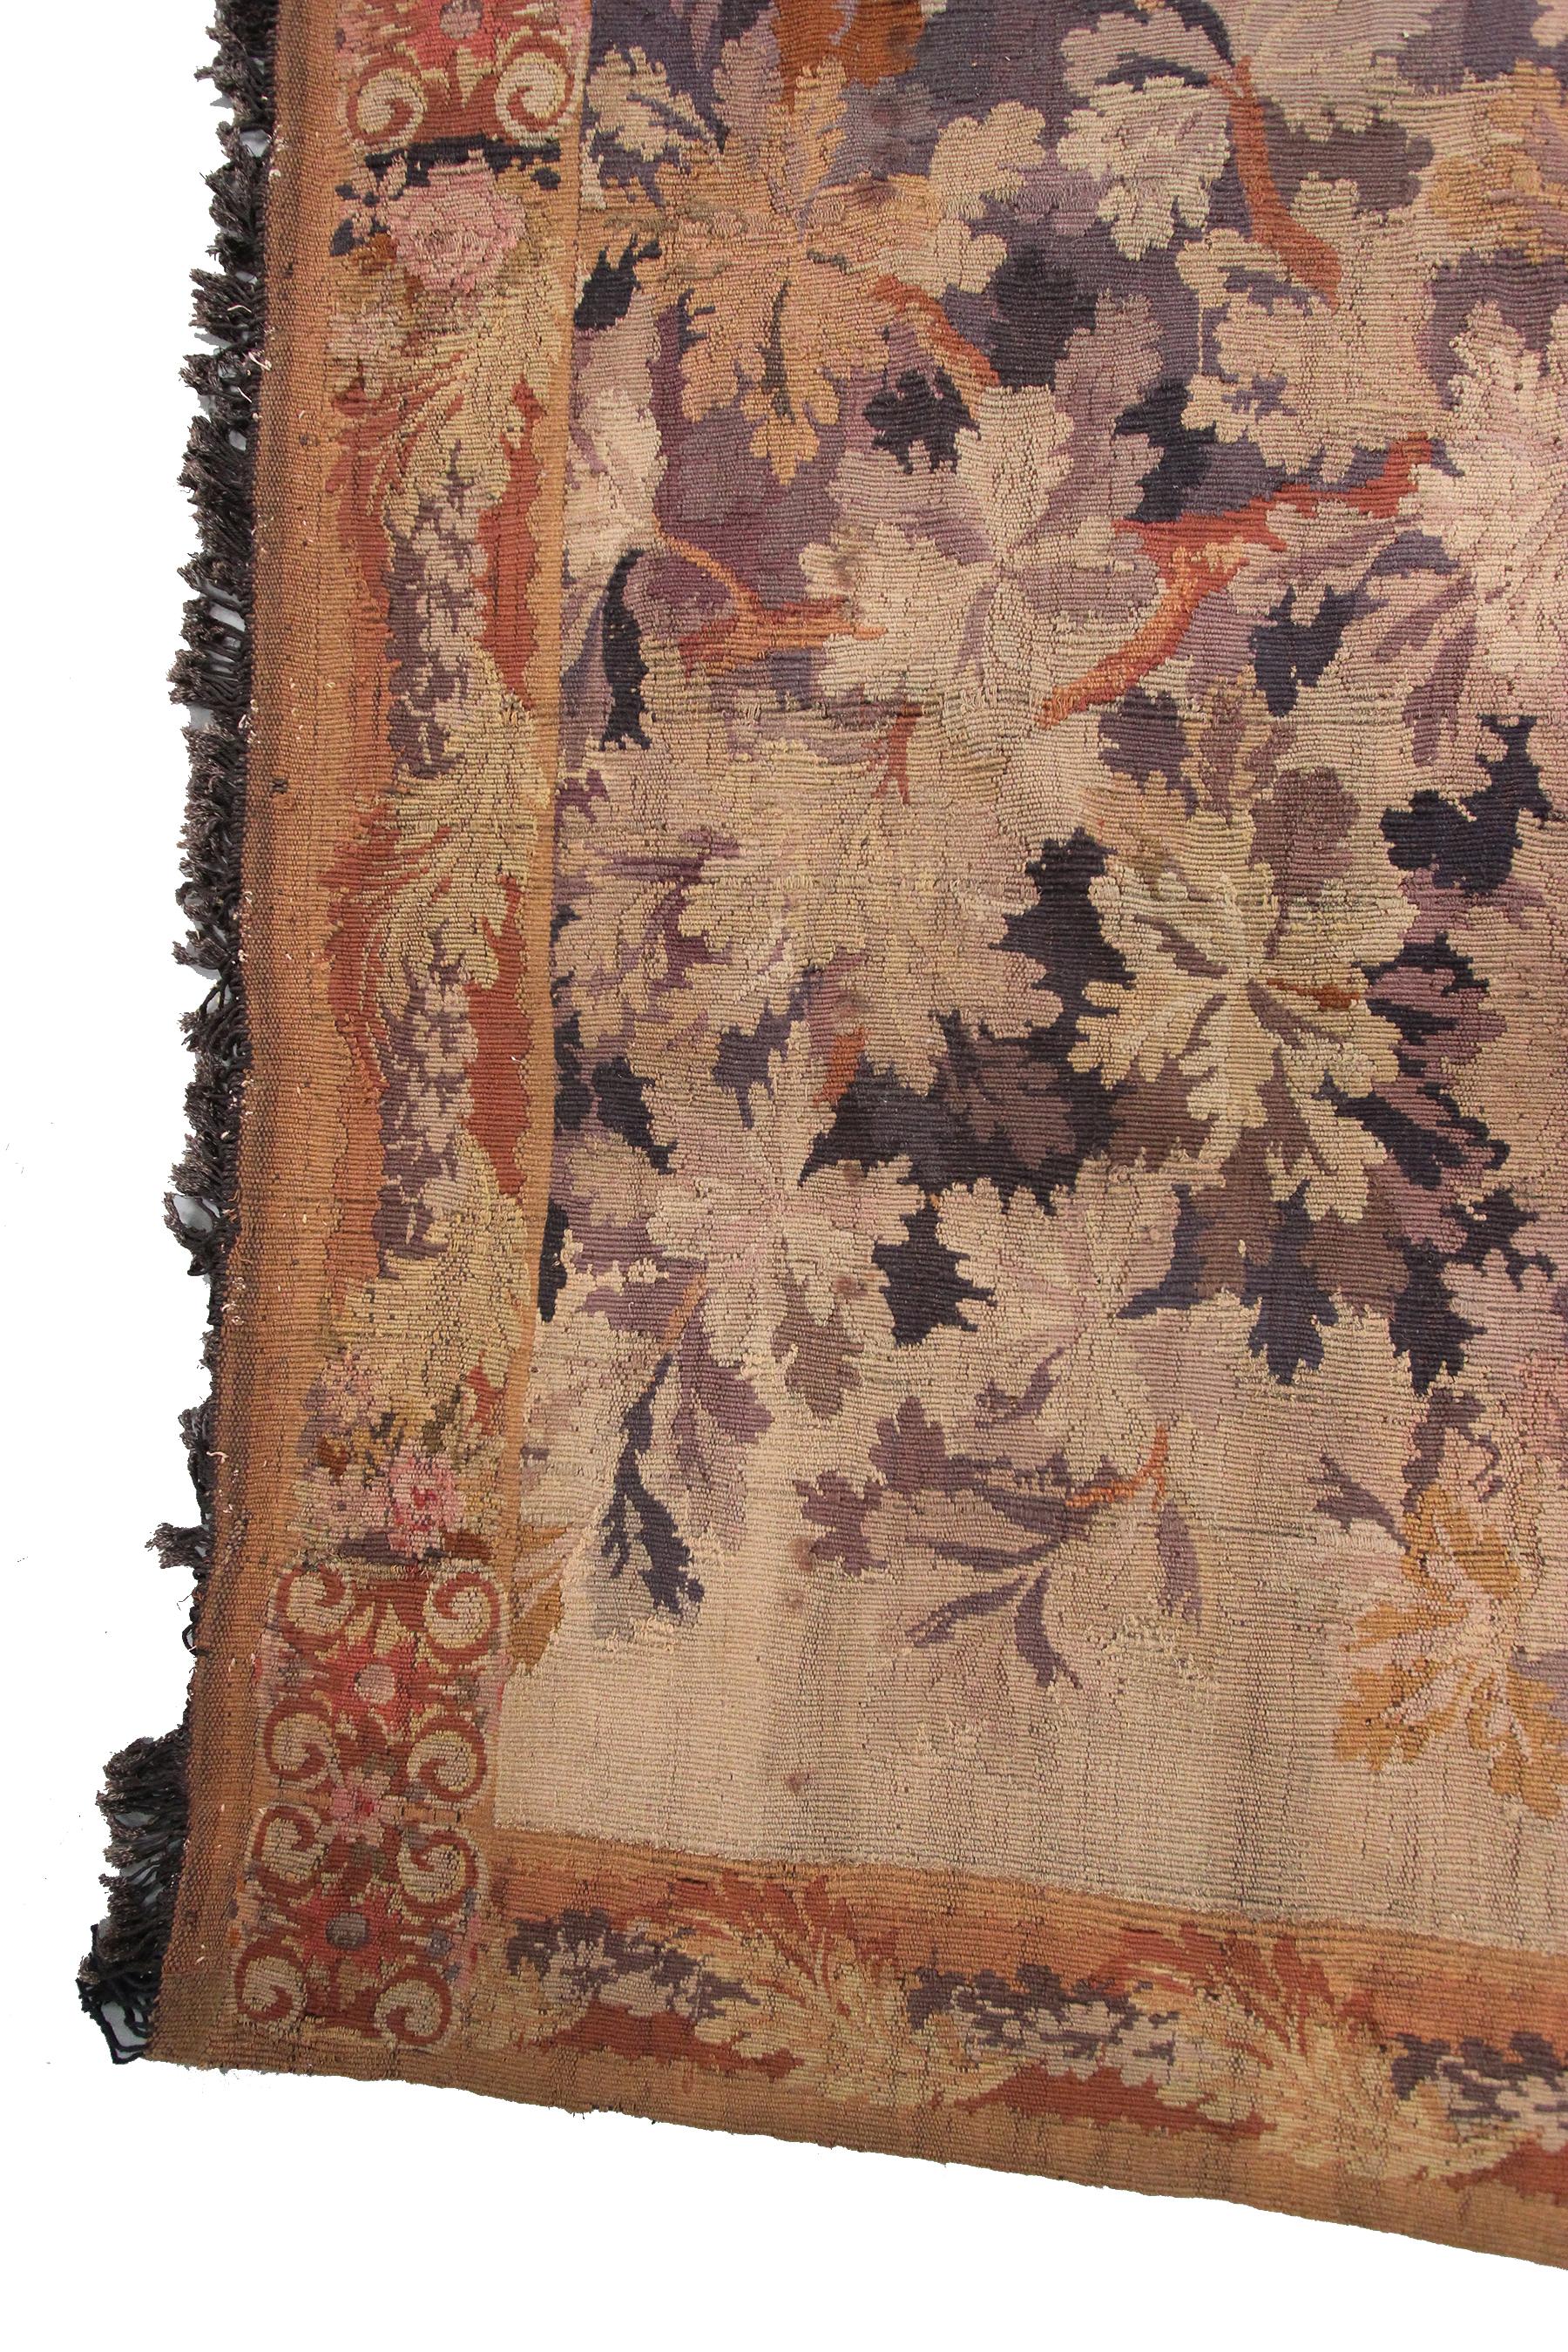 Wool Antique Tapestry Antique French Tapestry Large Tapestry, 1900